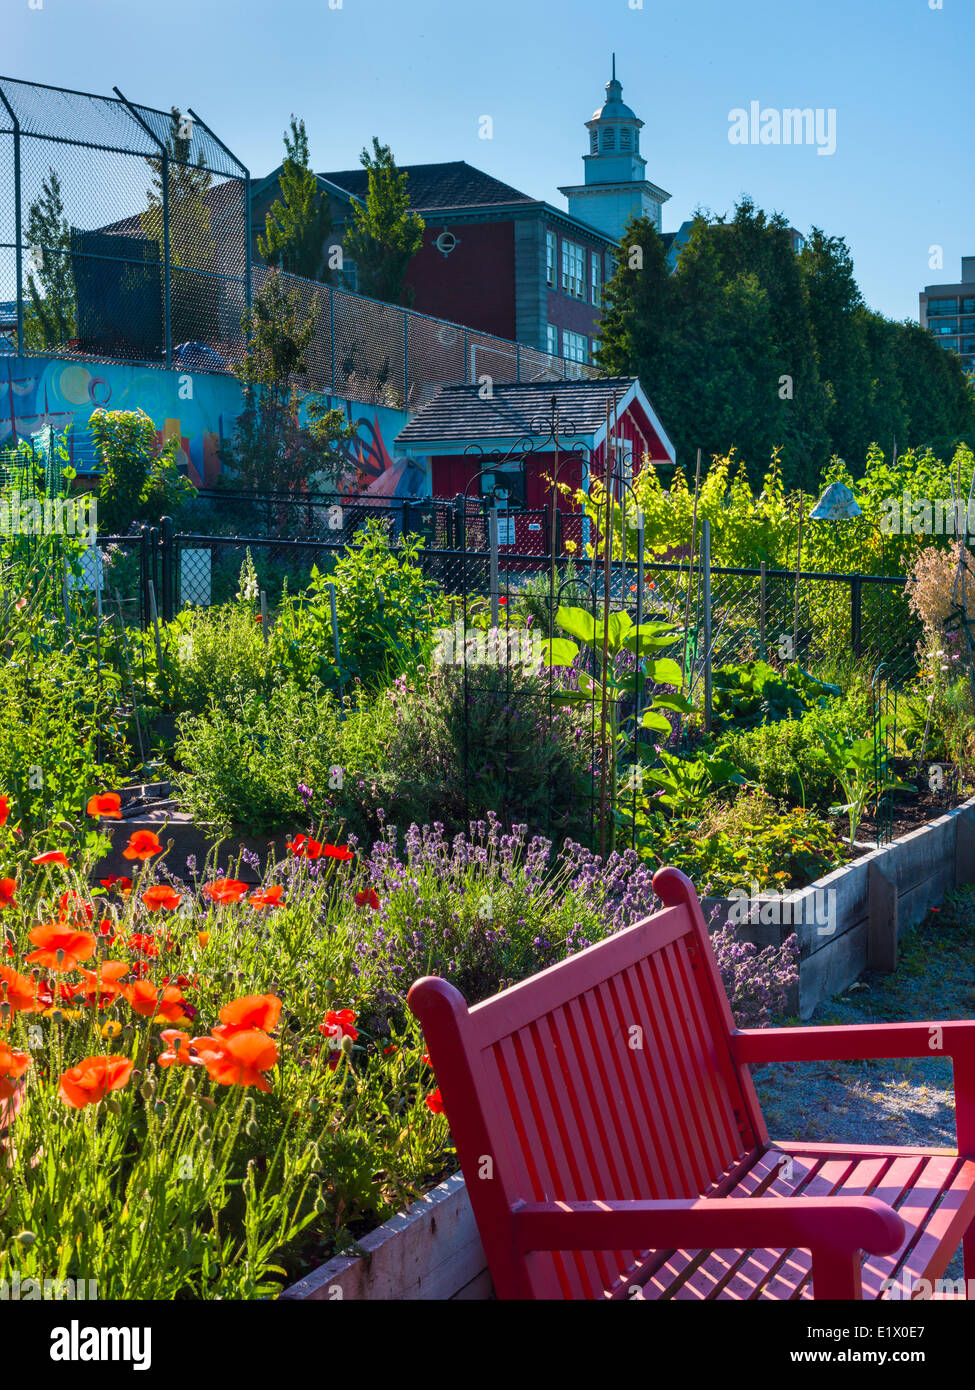 Community garden, North vancouver. Queen Mary elementary school in background. Stock Photo